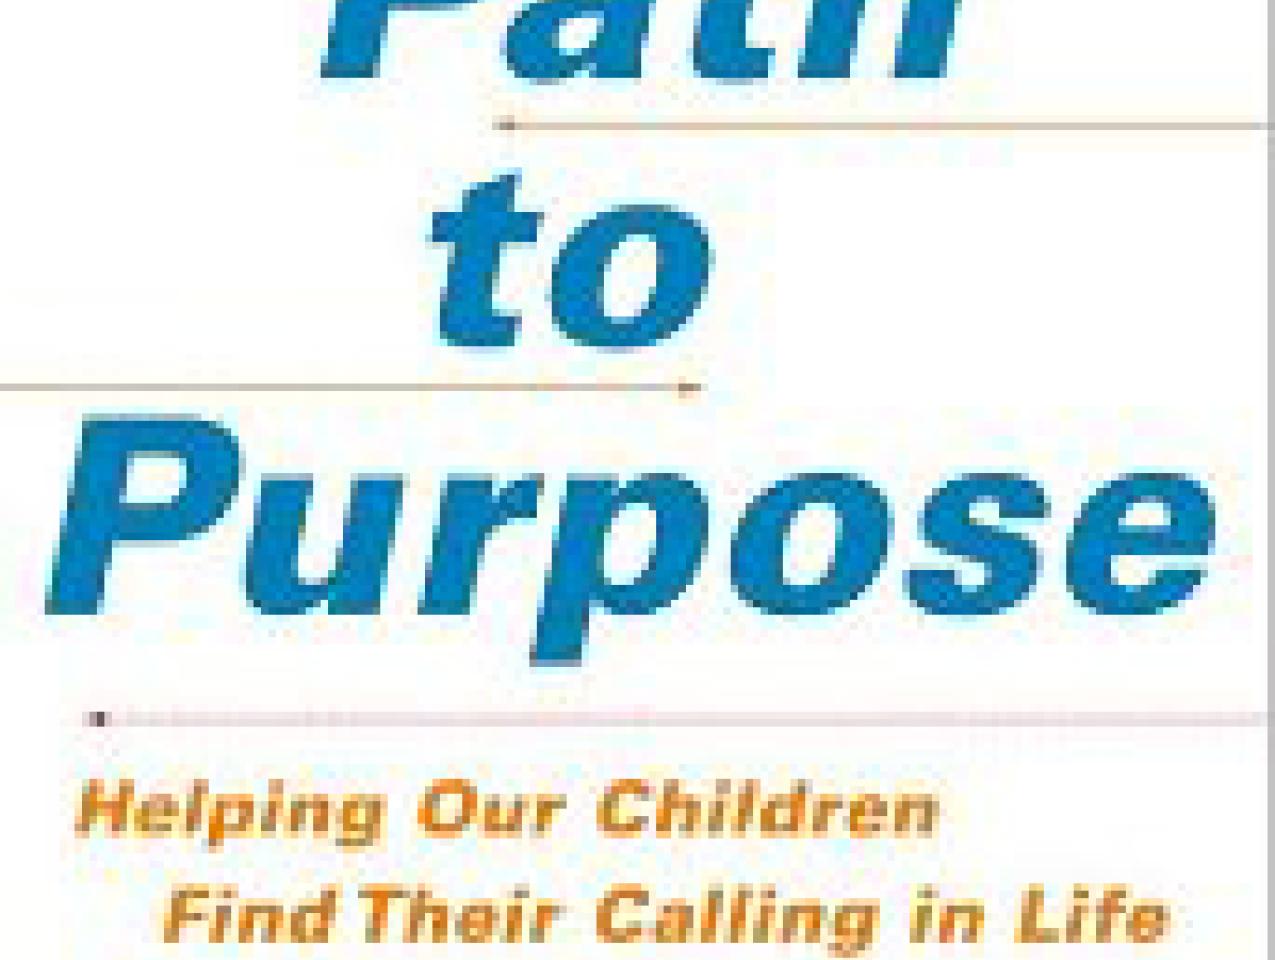 The Path to Purpose - book cover